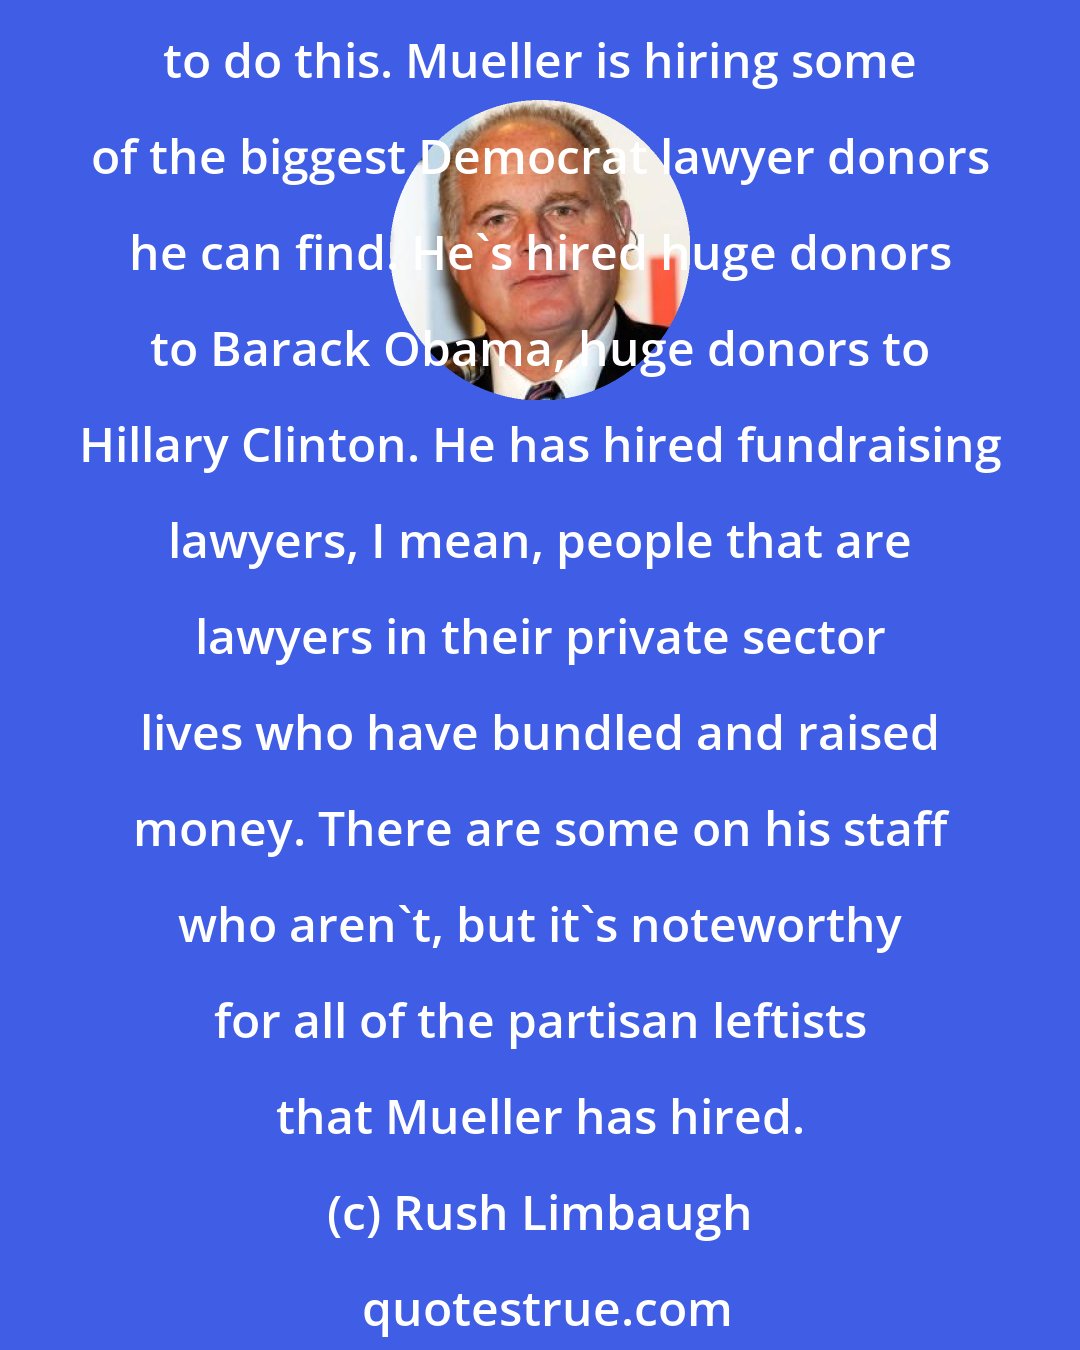 Rush Limbaugh: There are three popular theories being bandied about to explain Robert Mueller investigation, but we have to remember that it was the Donald Trump administration that decided to do this. Mueller is hiring some of the biggest Democrat lawyer donors he can find. He's hired huge donors to Barack Obama, huge donors to Hillary Clinton. He has hired fundraising lawyers, I mean, people that are lawyers in their private sector lives who have bundled and raised money. There are some on his staff who aren't, but it's noteworthy for all of the partisan leftists that Mueller has hired.